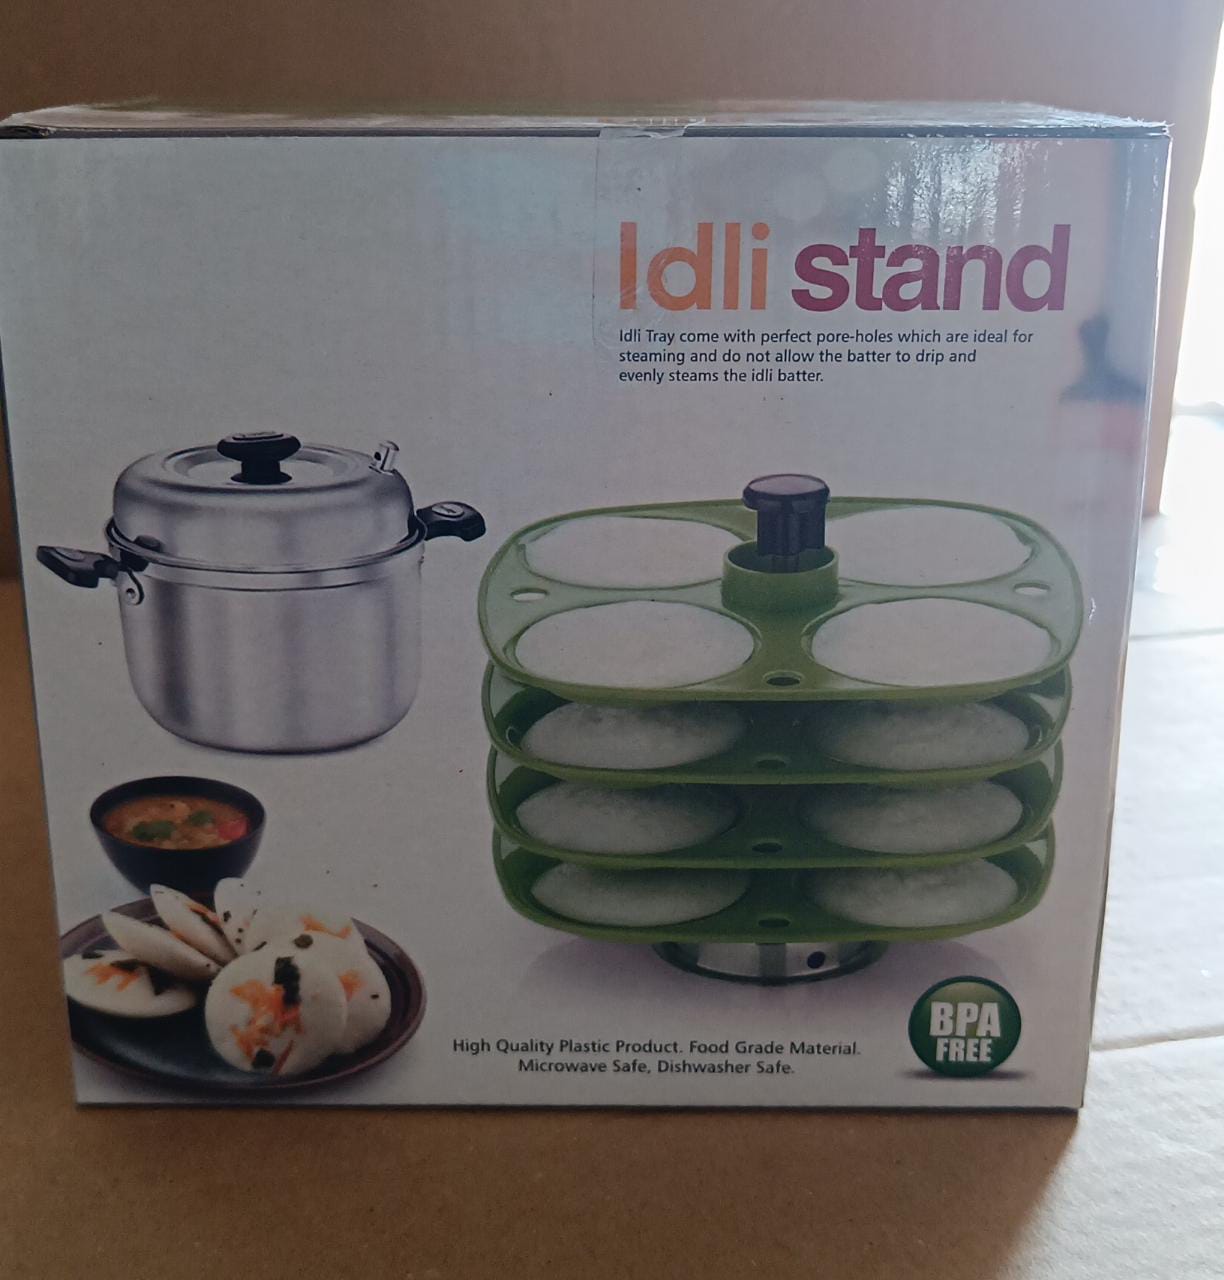 5346 3 Layer Idli Stand used in all kinds of household kitchen purposes for holding and serving idlis.